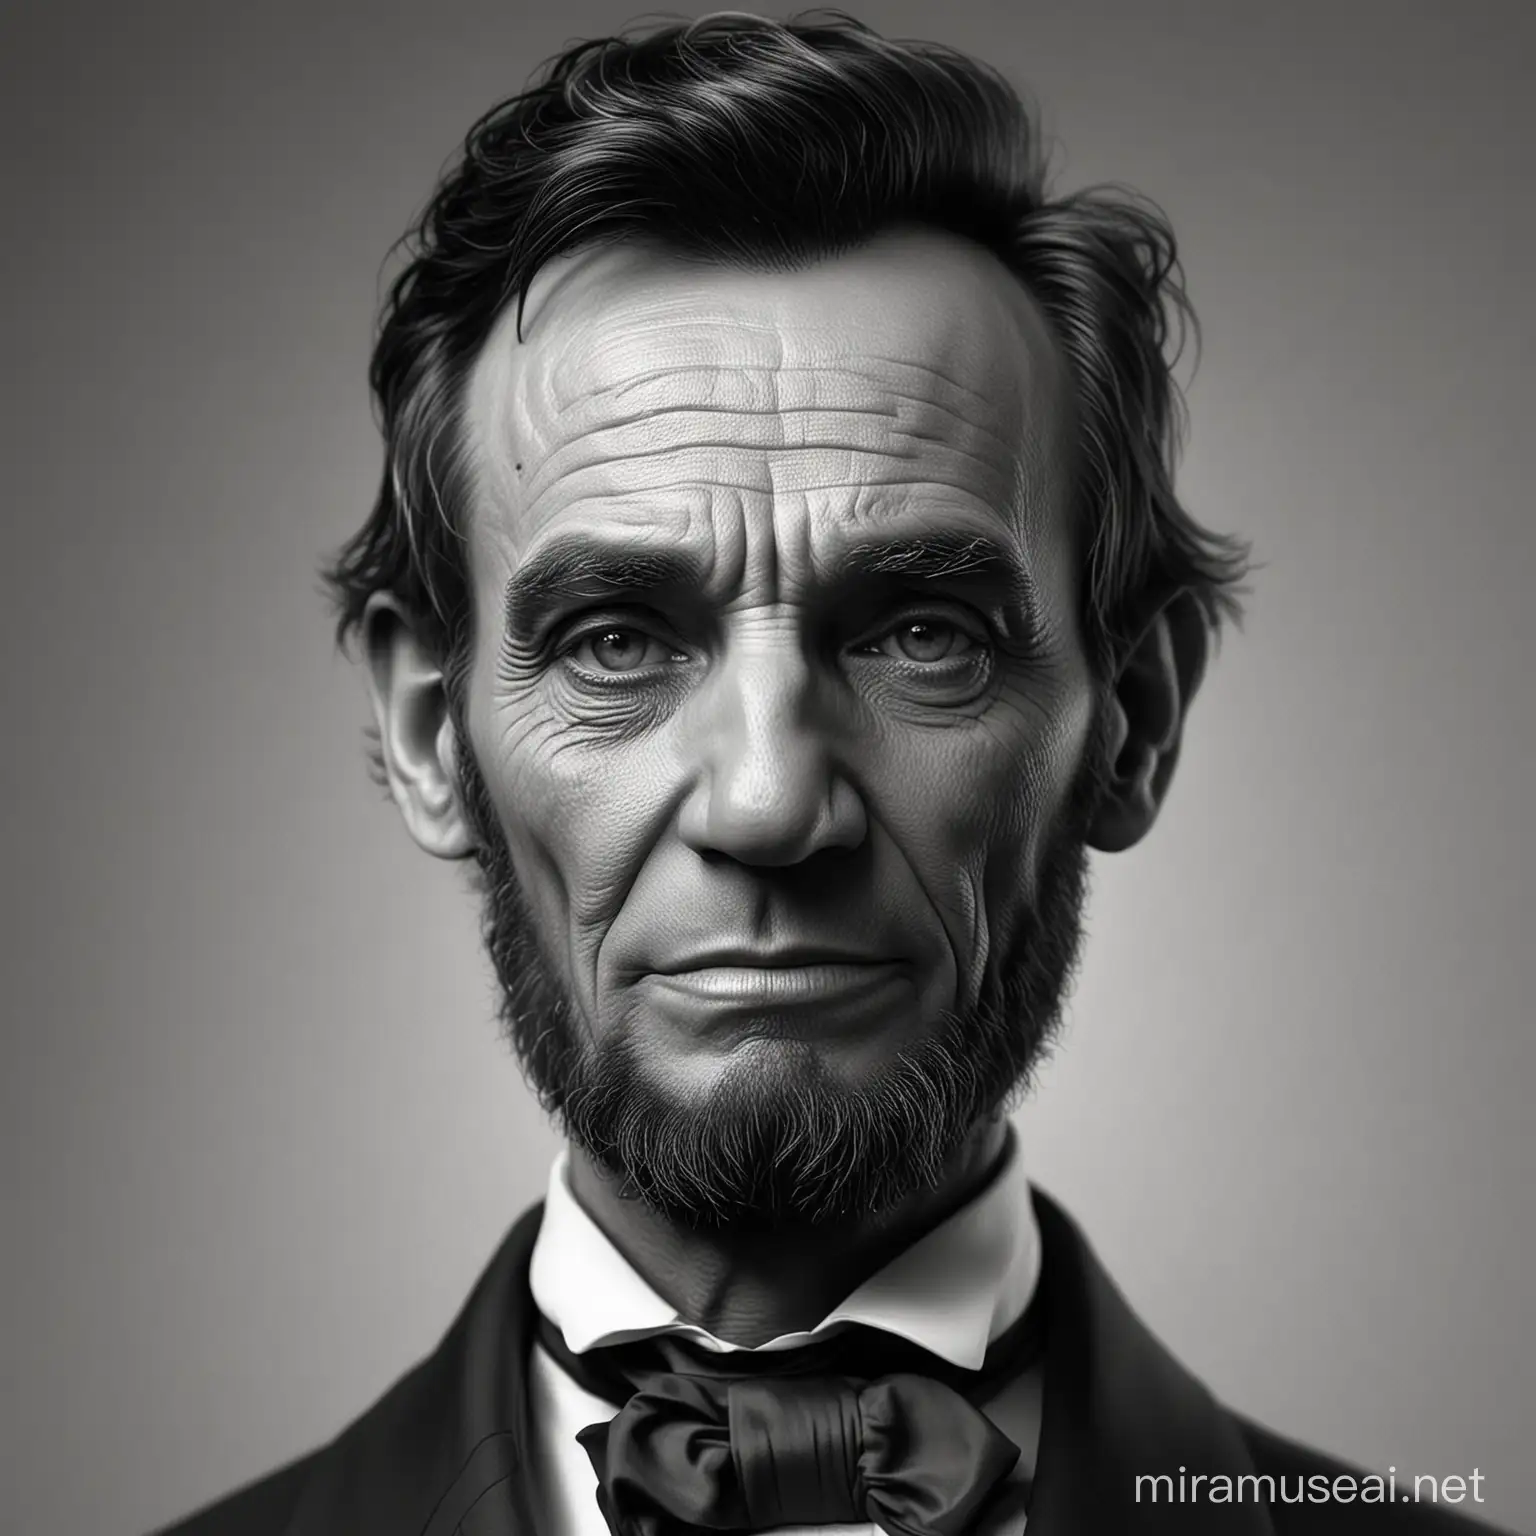 Abraham Lincoln 4K Ultra Realistic Portrait in Black and White